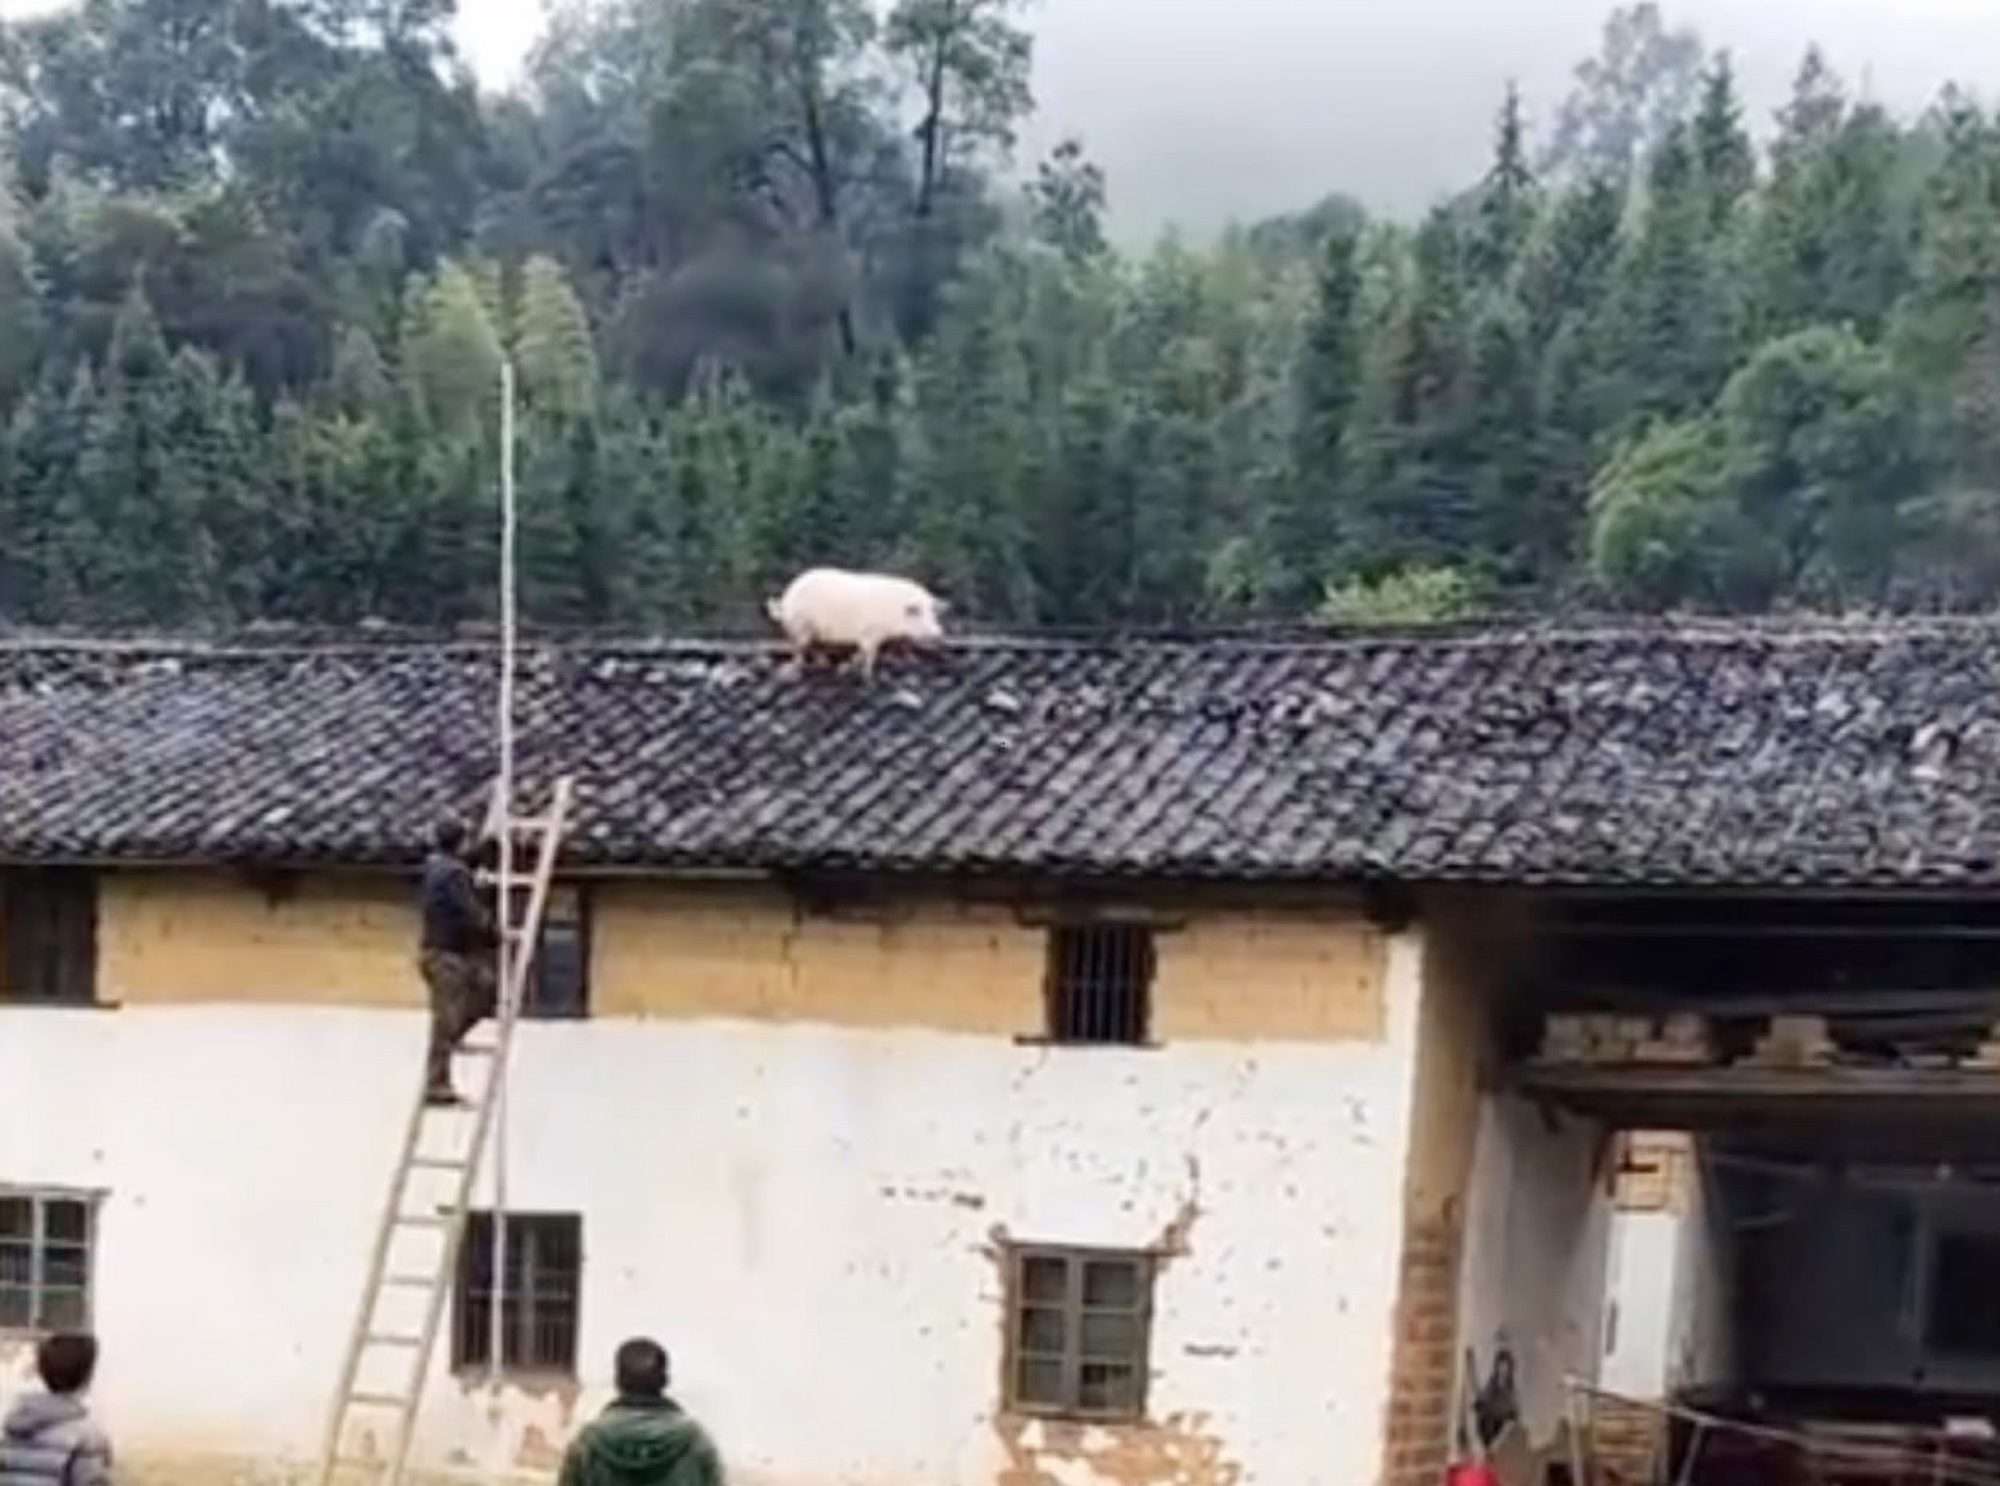 Read more about the article Worker Pokes Pig With Massive Pole To Urge It To Get Down From Roof Where It Escaped To Avoid Being Butchered